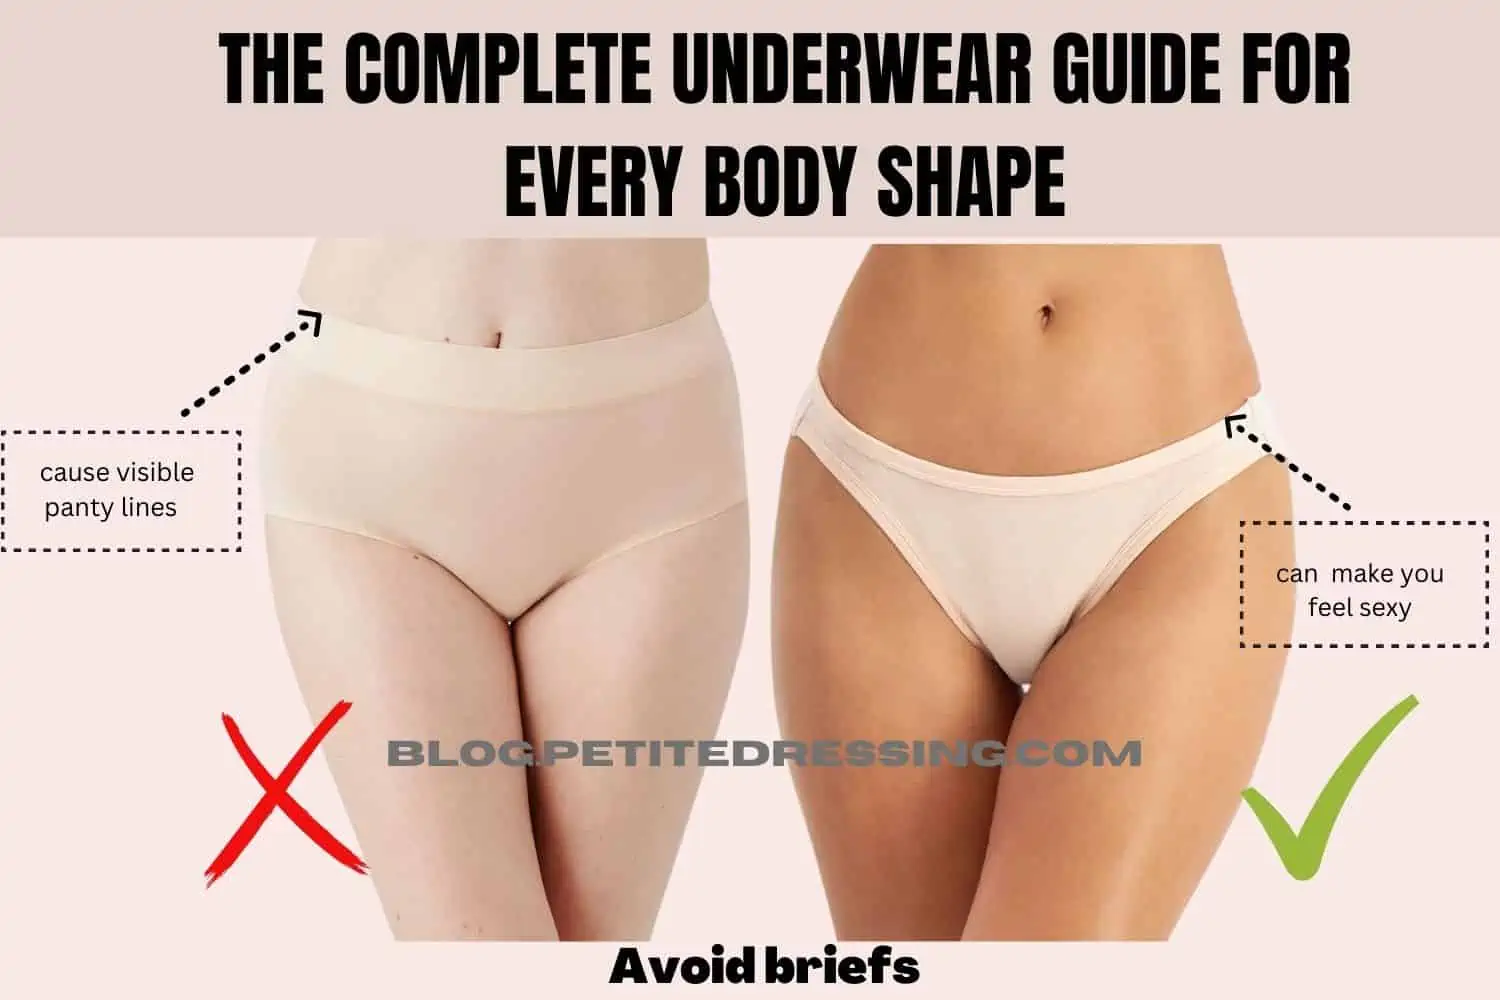 No More Back Fat or Visible Panty Lines